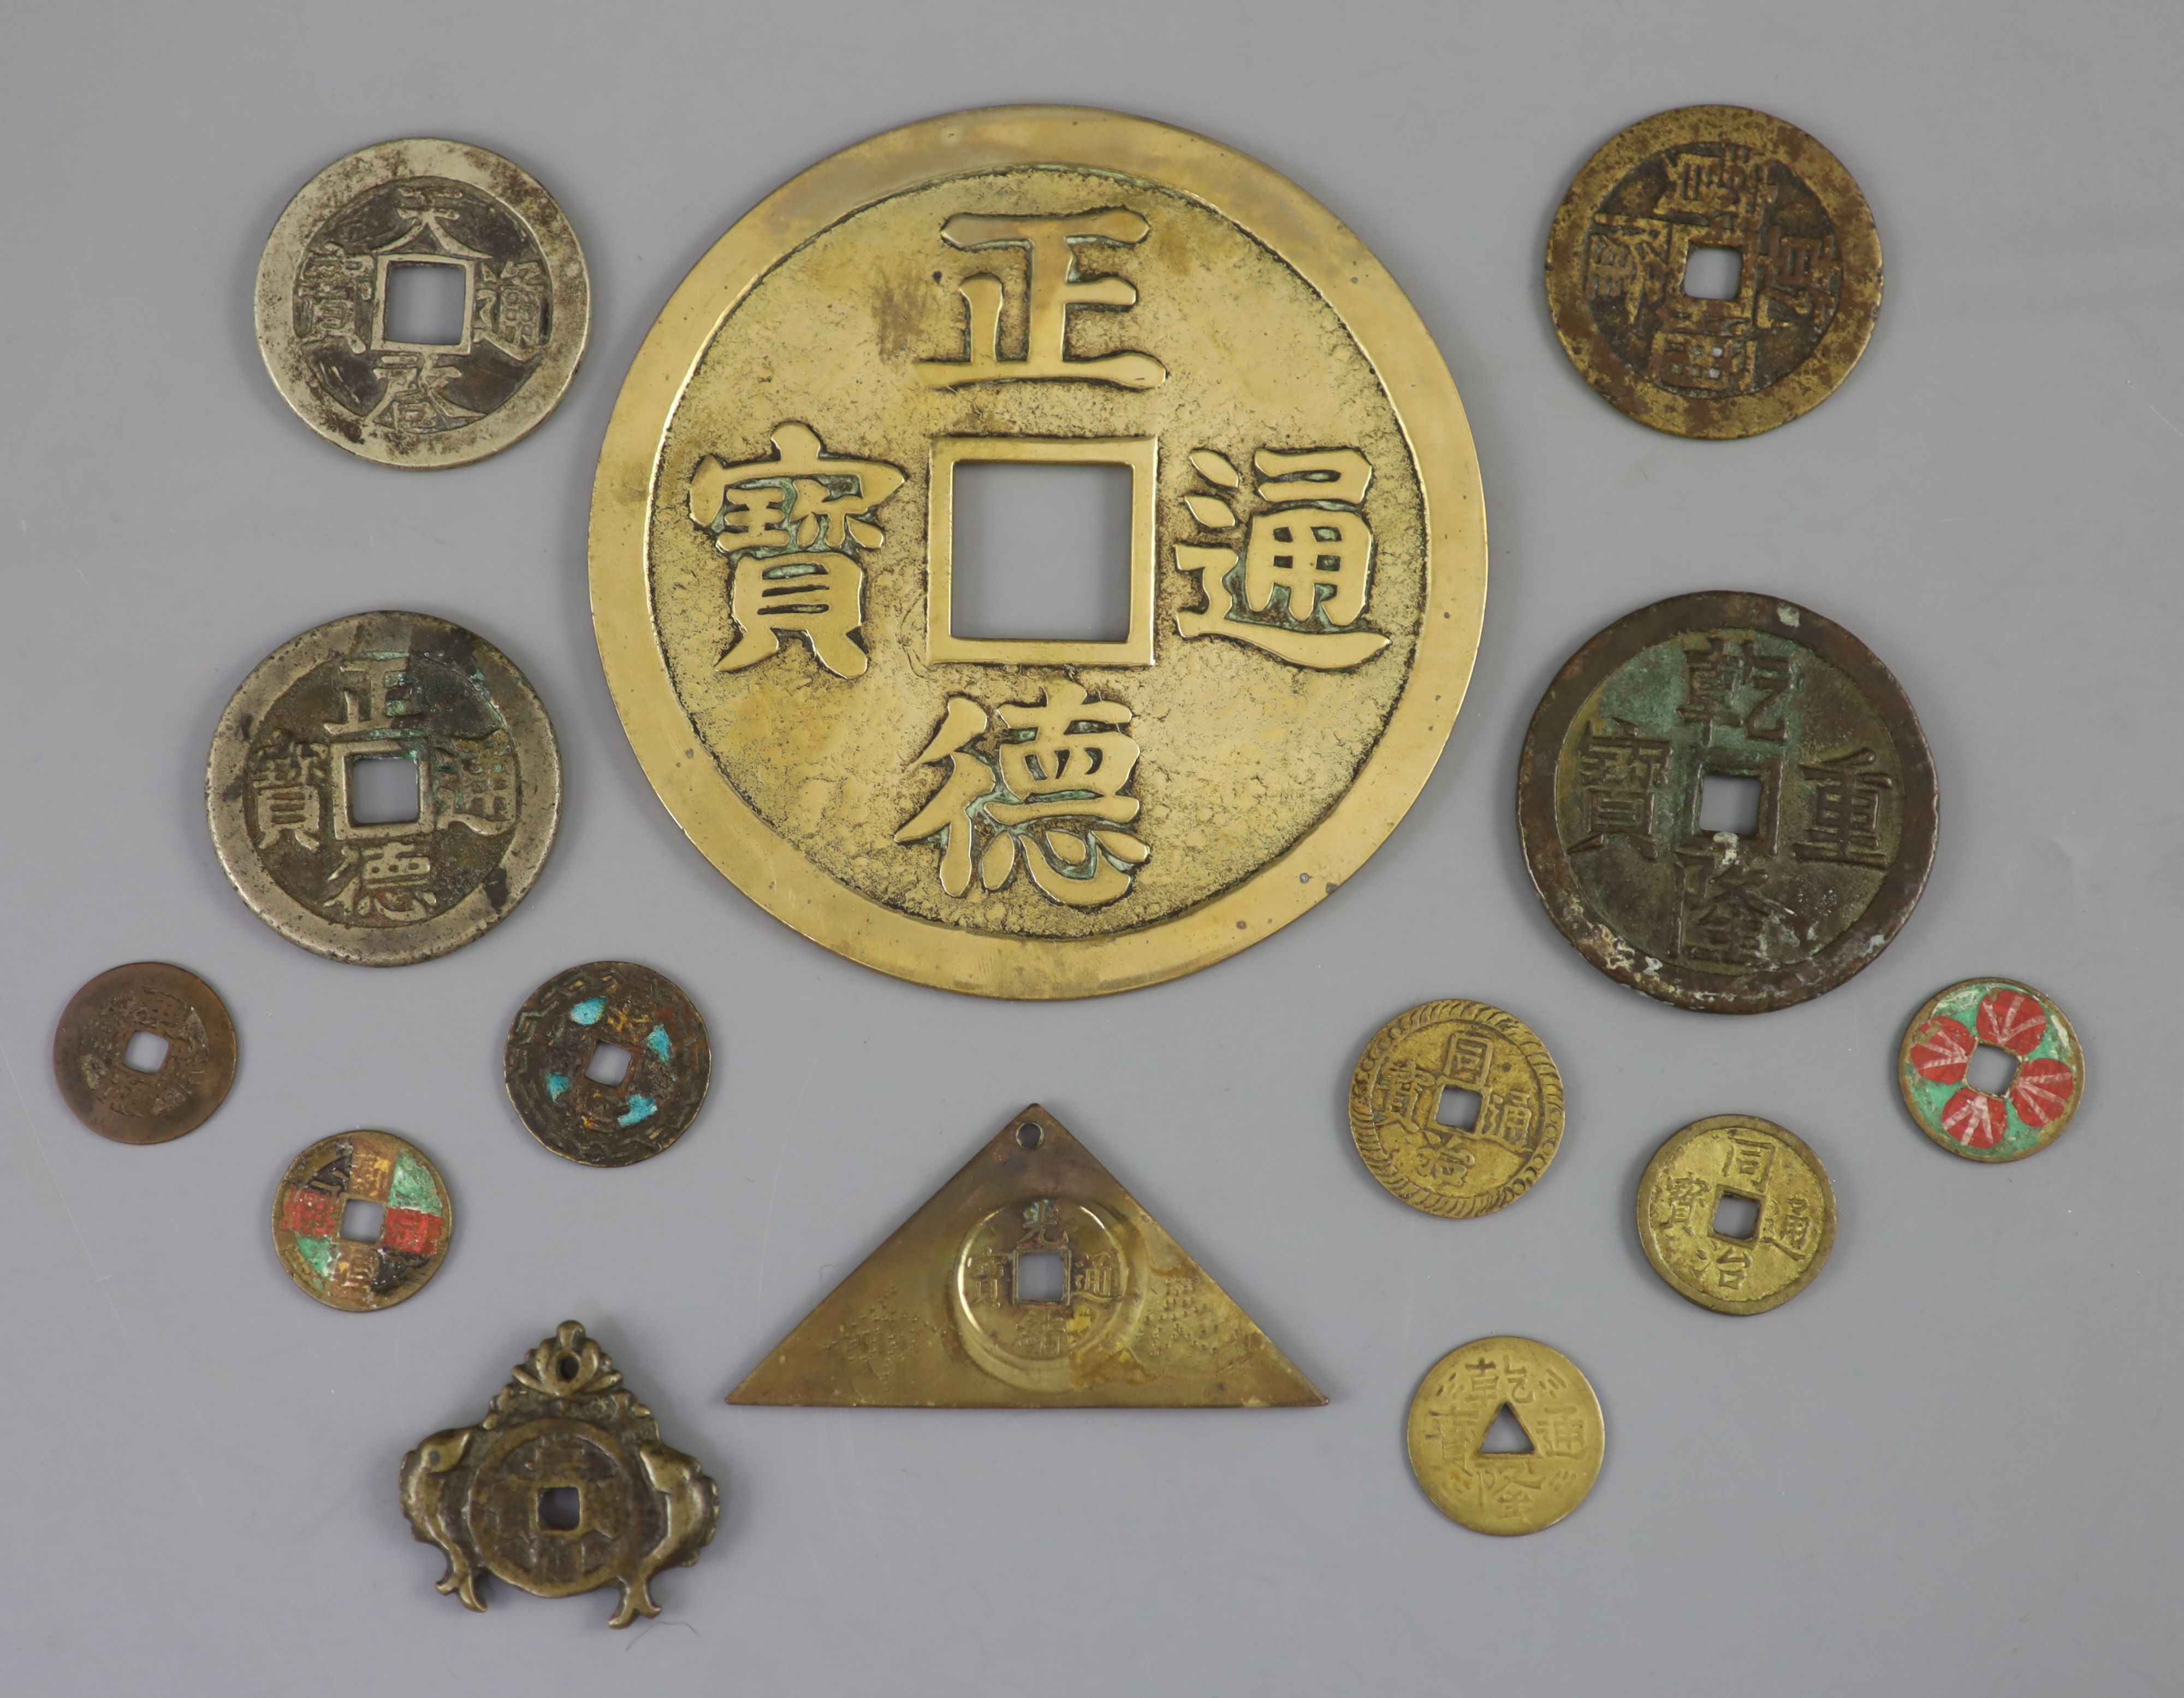 China, a group of 14 bronze and brass coin charms or amulets, Qing to Republic period, F to VF